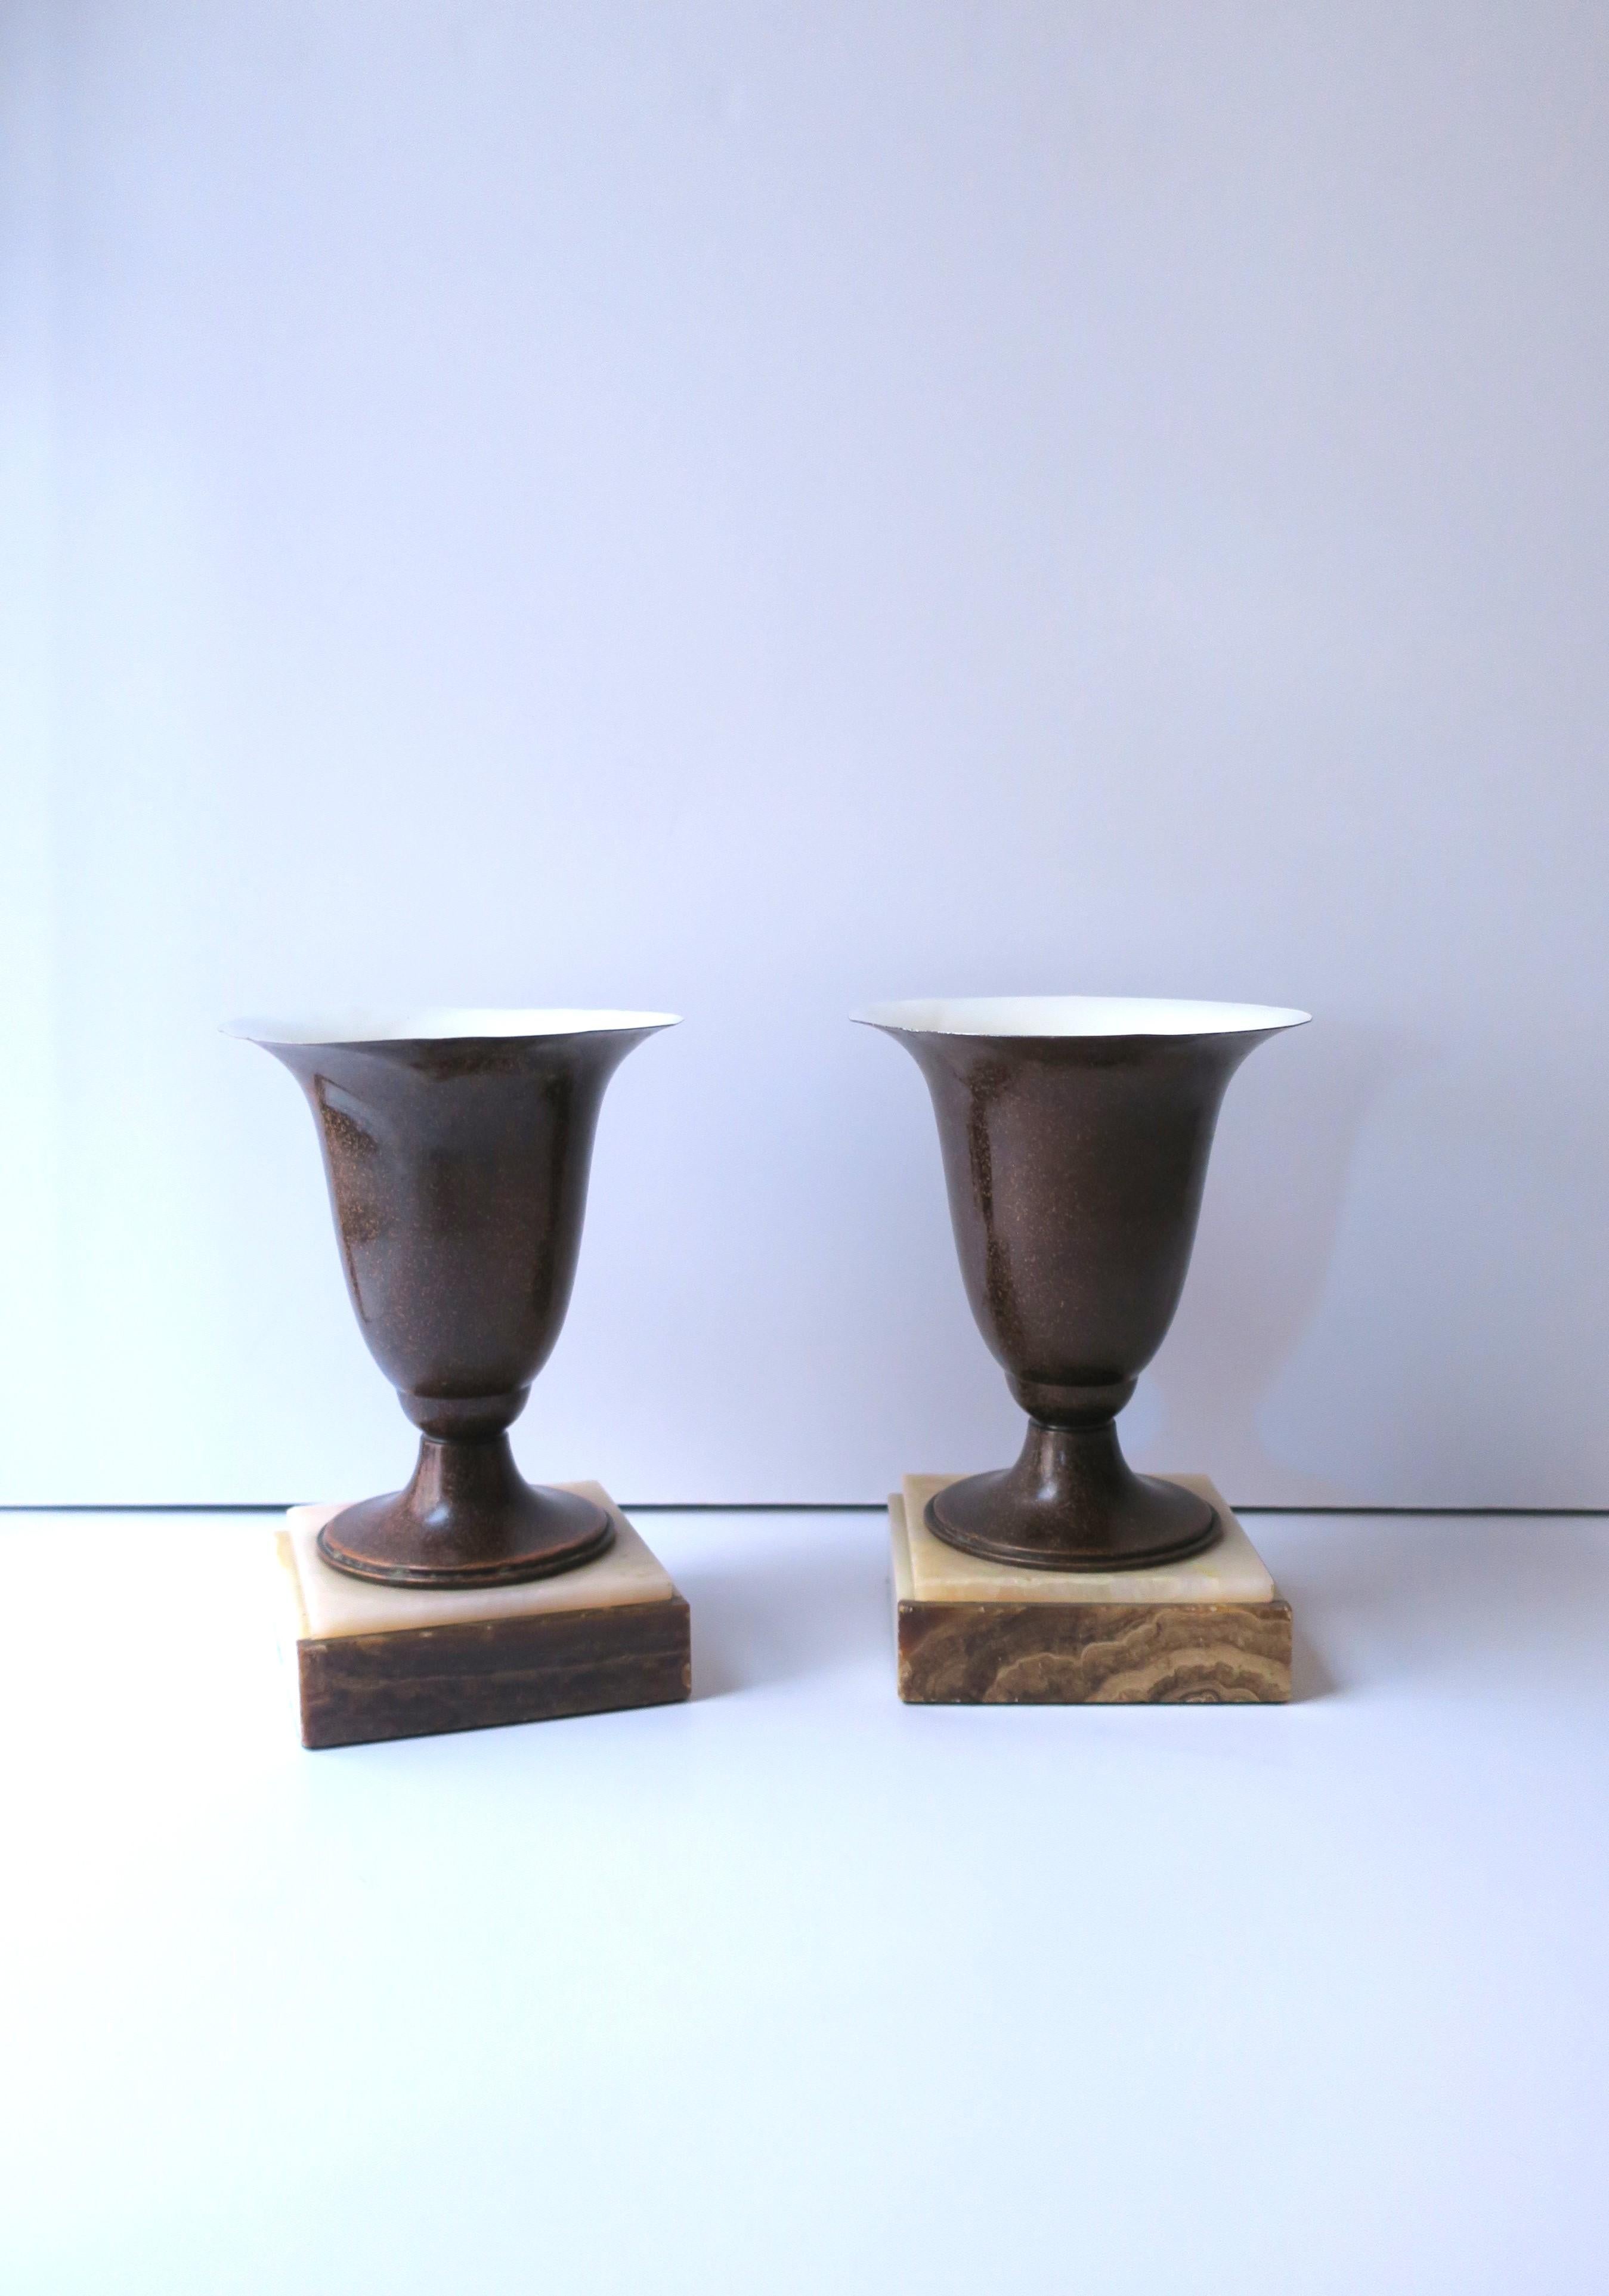 20th Century Art Deco Urn Form Table Lamps Onyx Marble Bases, Pair For Sale